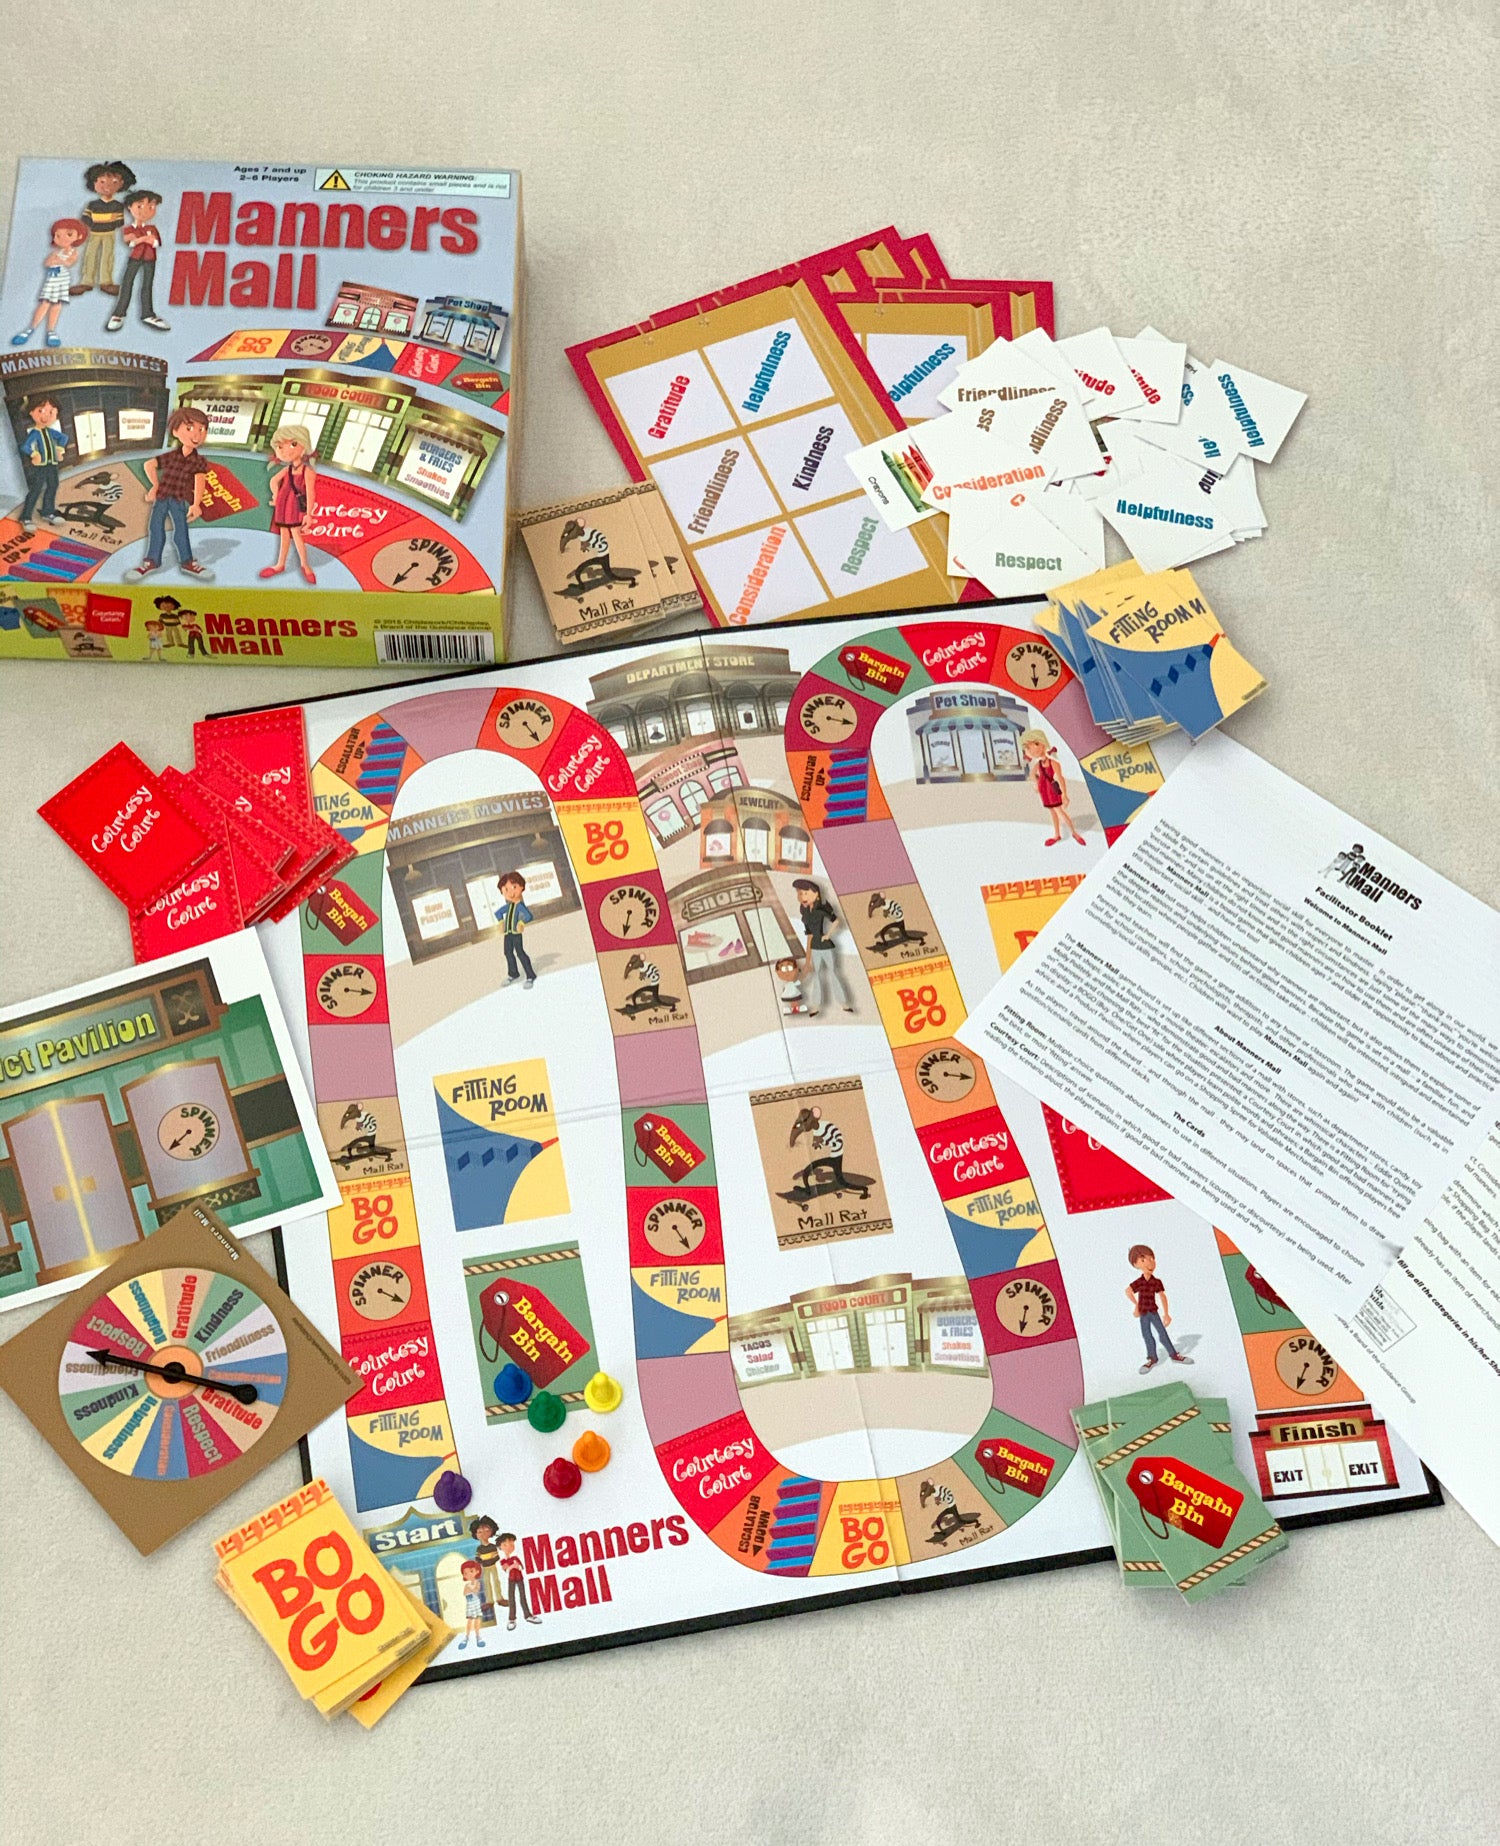 Manners Mall Board Game